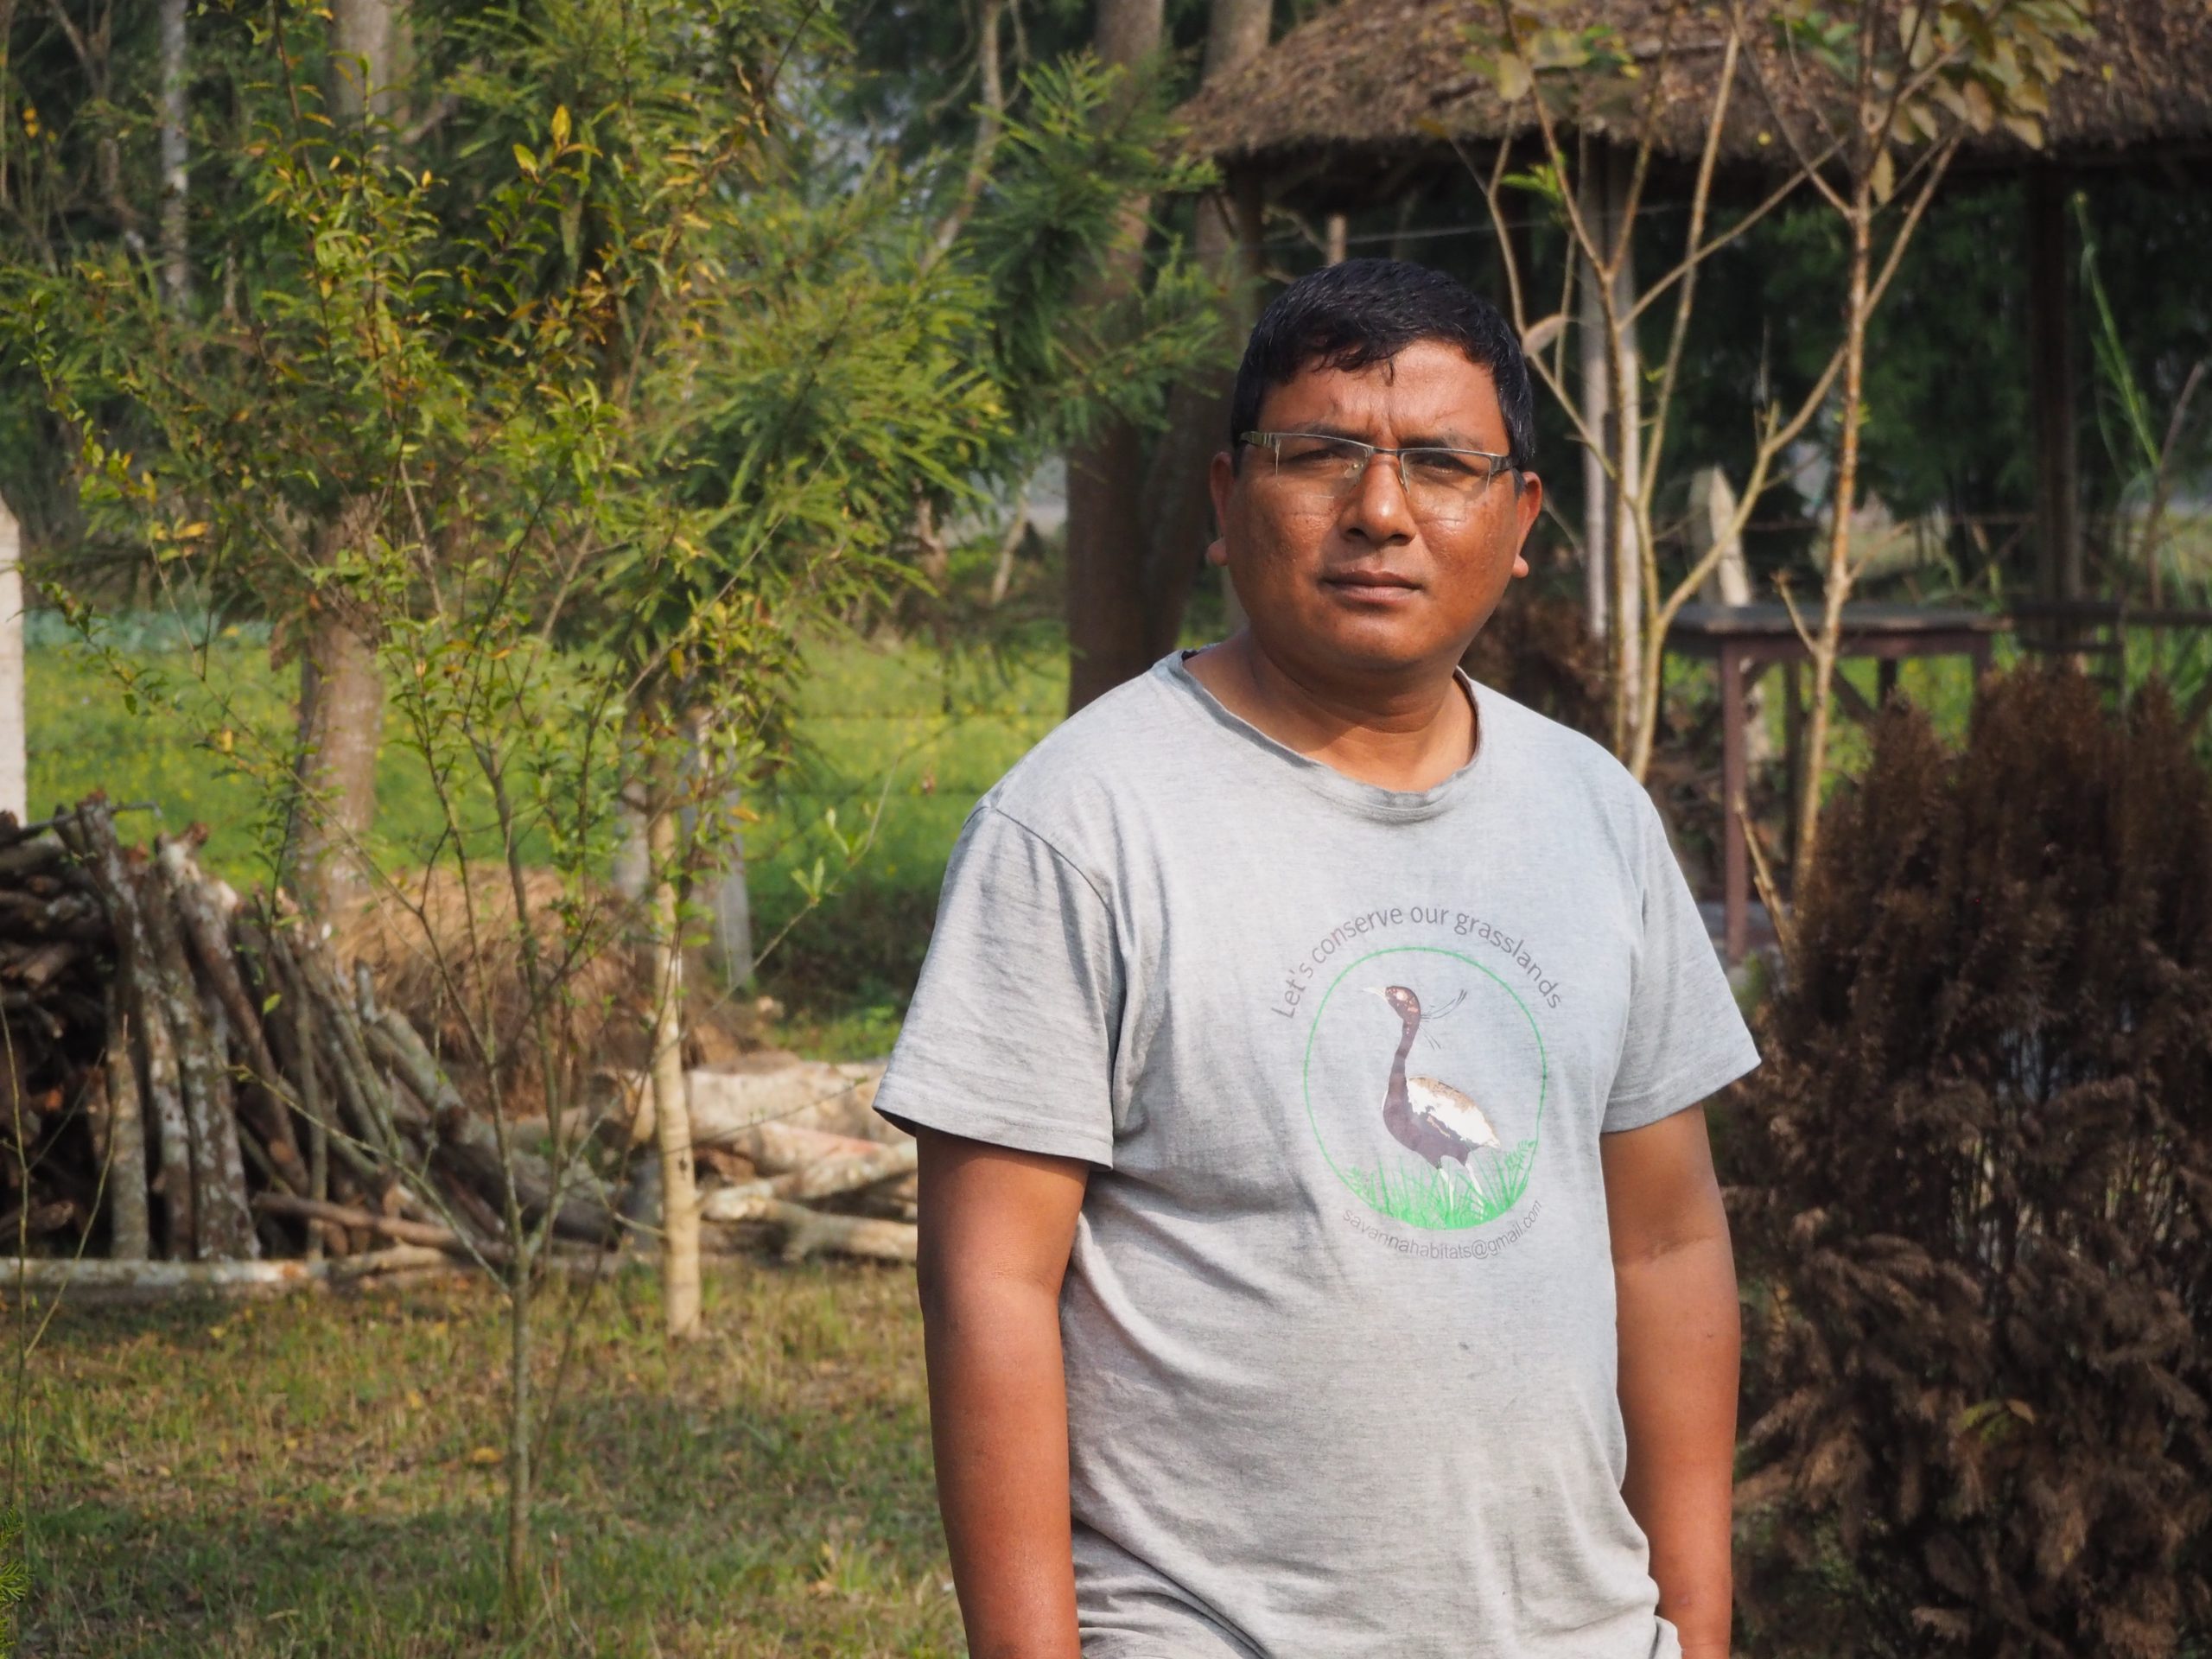 Gyan Bahadur Bote, one of the few Bote people who hold an advanced degree, says the park lays too much blame on indigenous people for endangering wildlife (Image: Peter Gill/The Third Pole)